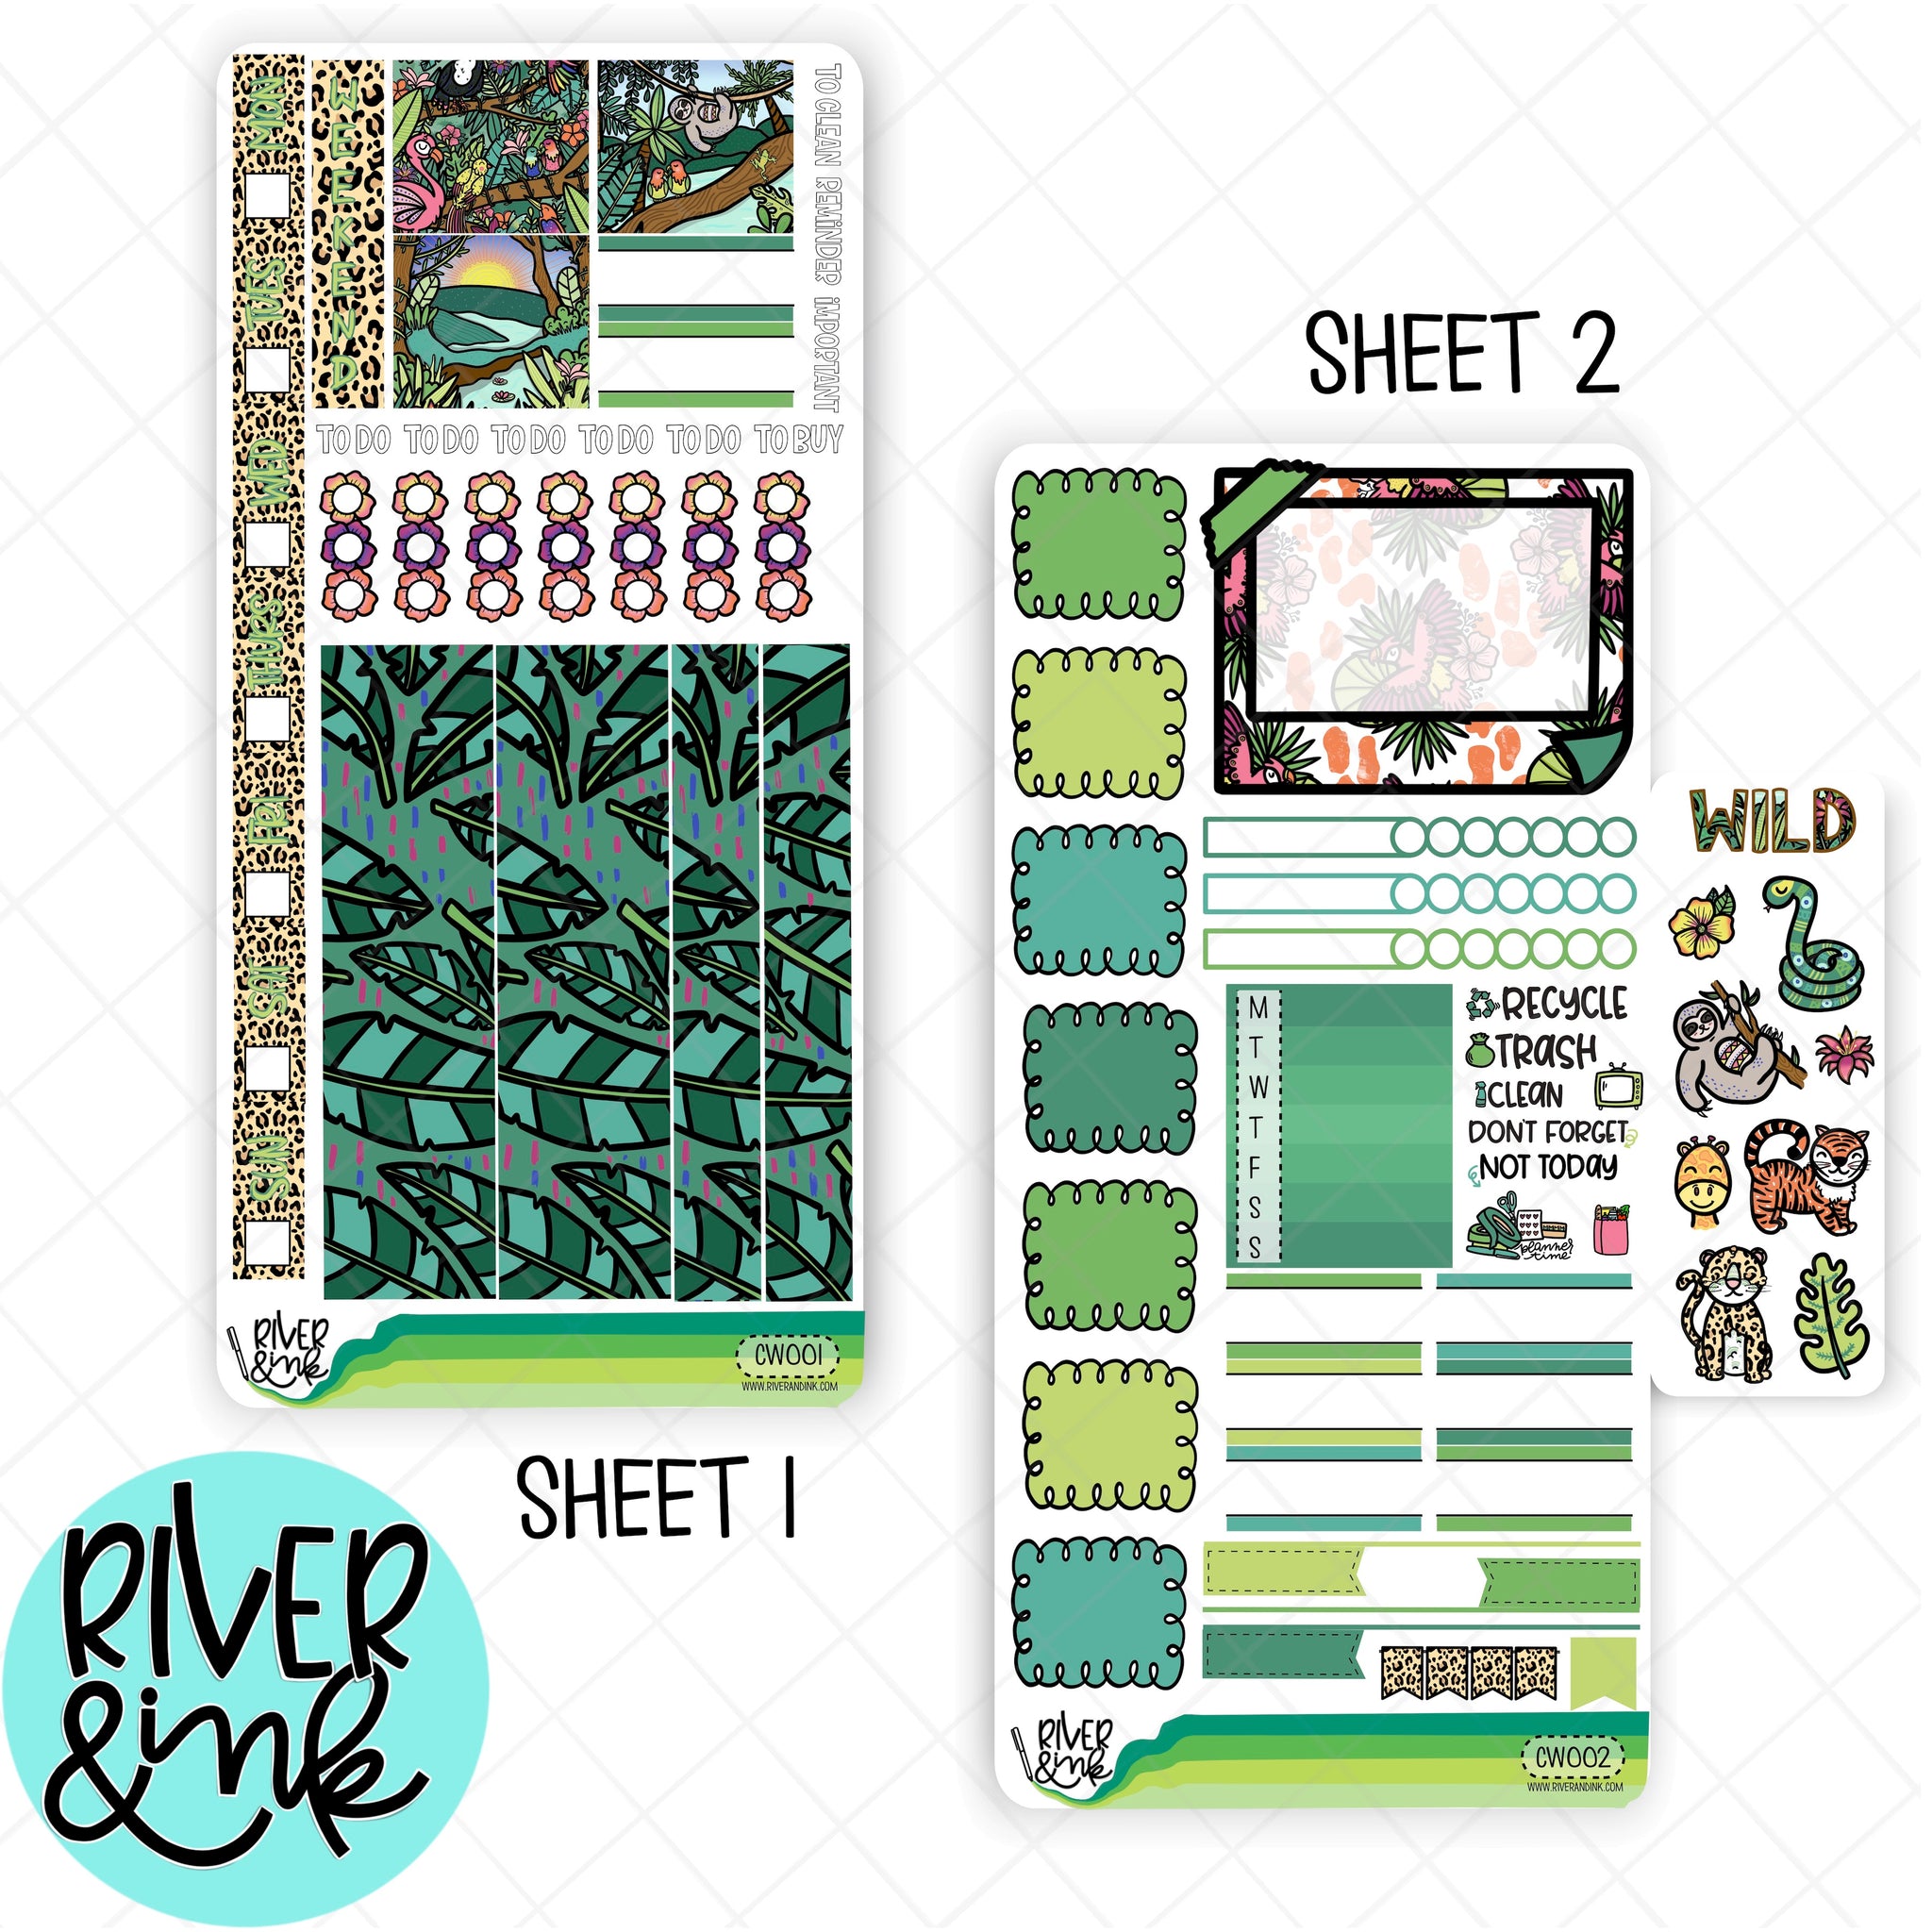 Call of the Wild | Hobonichi Weeks Sticker Kit Planner Stickers